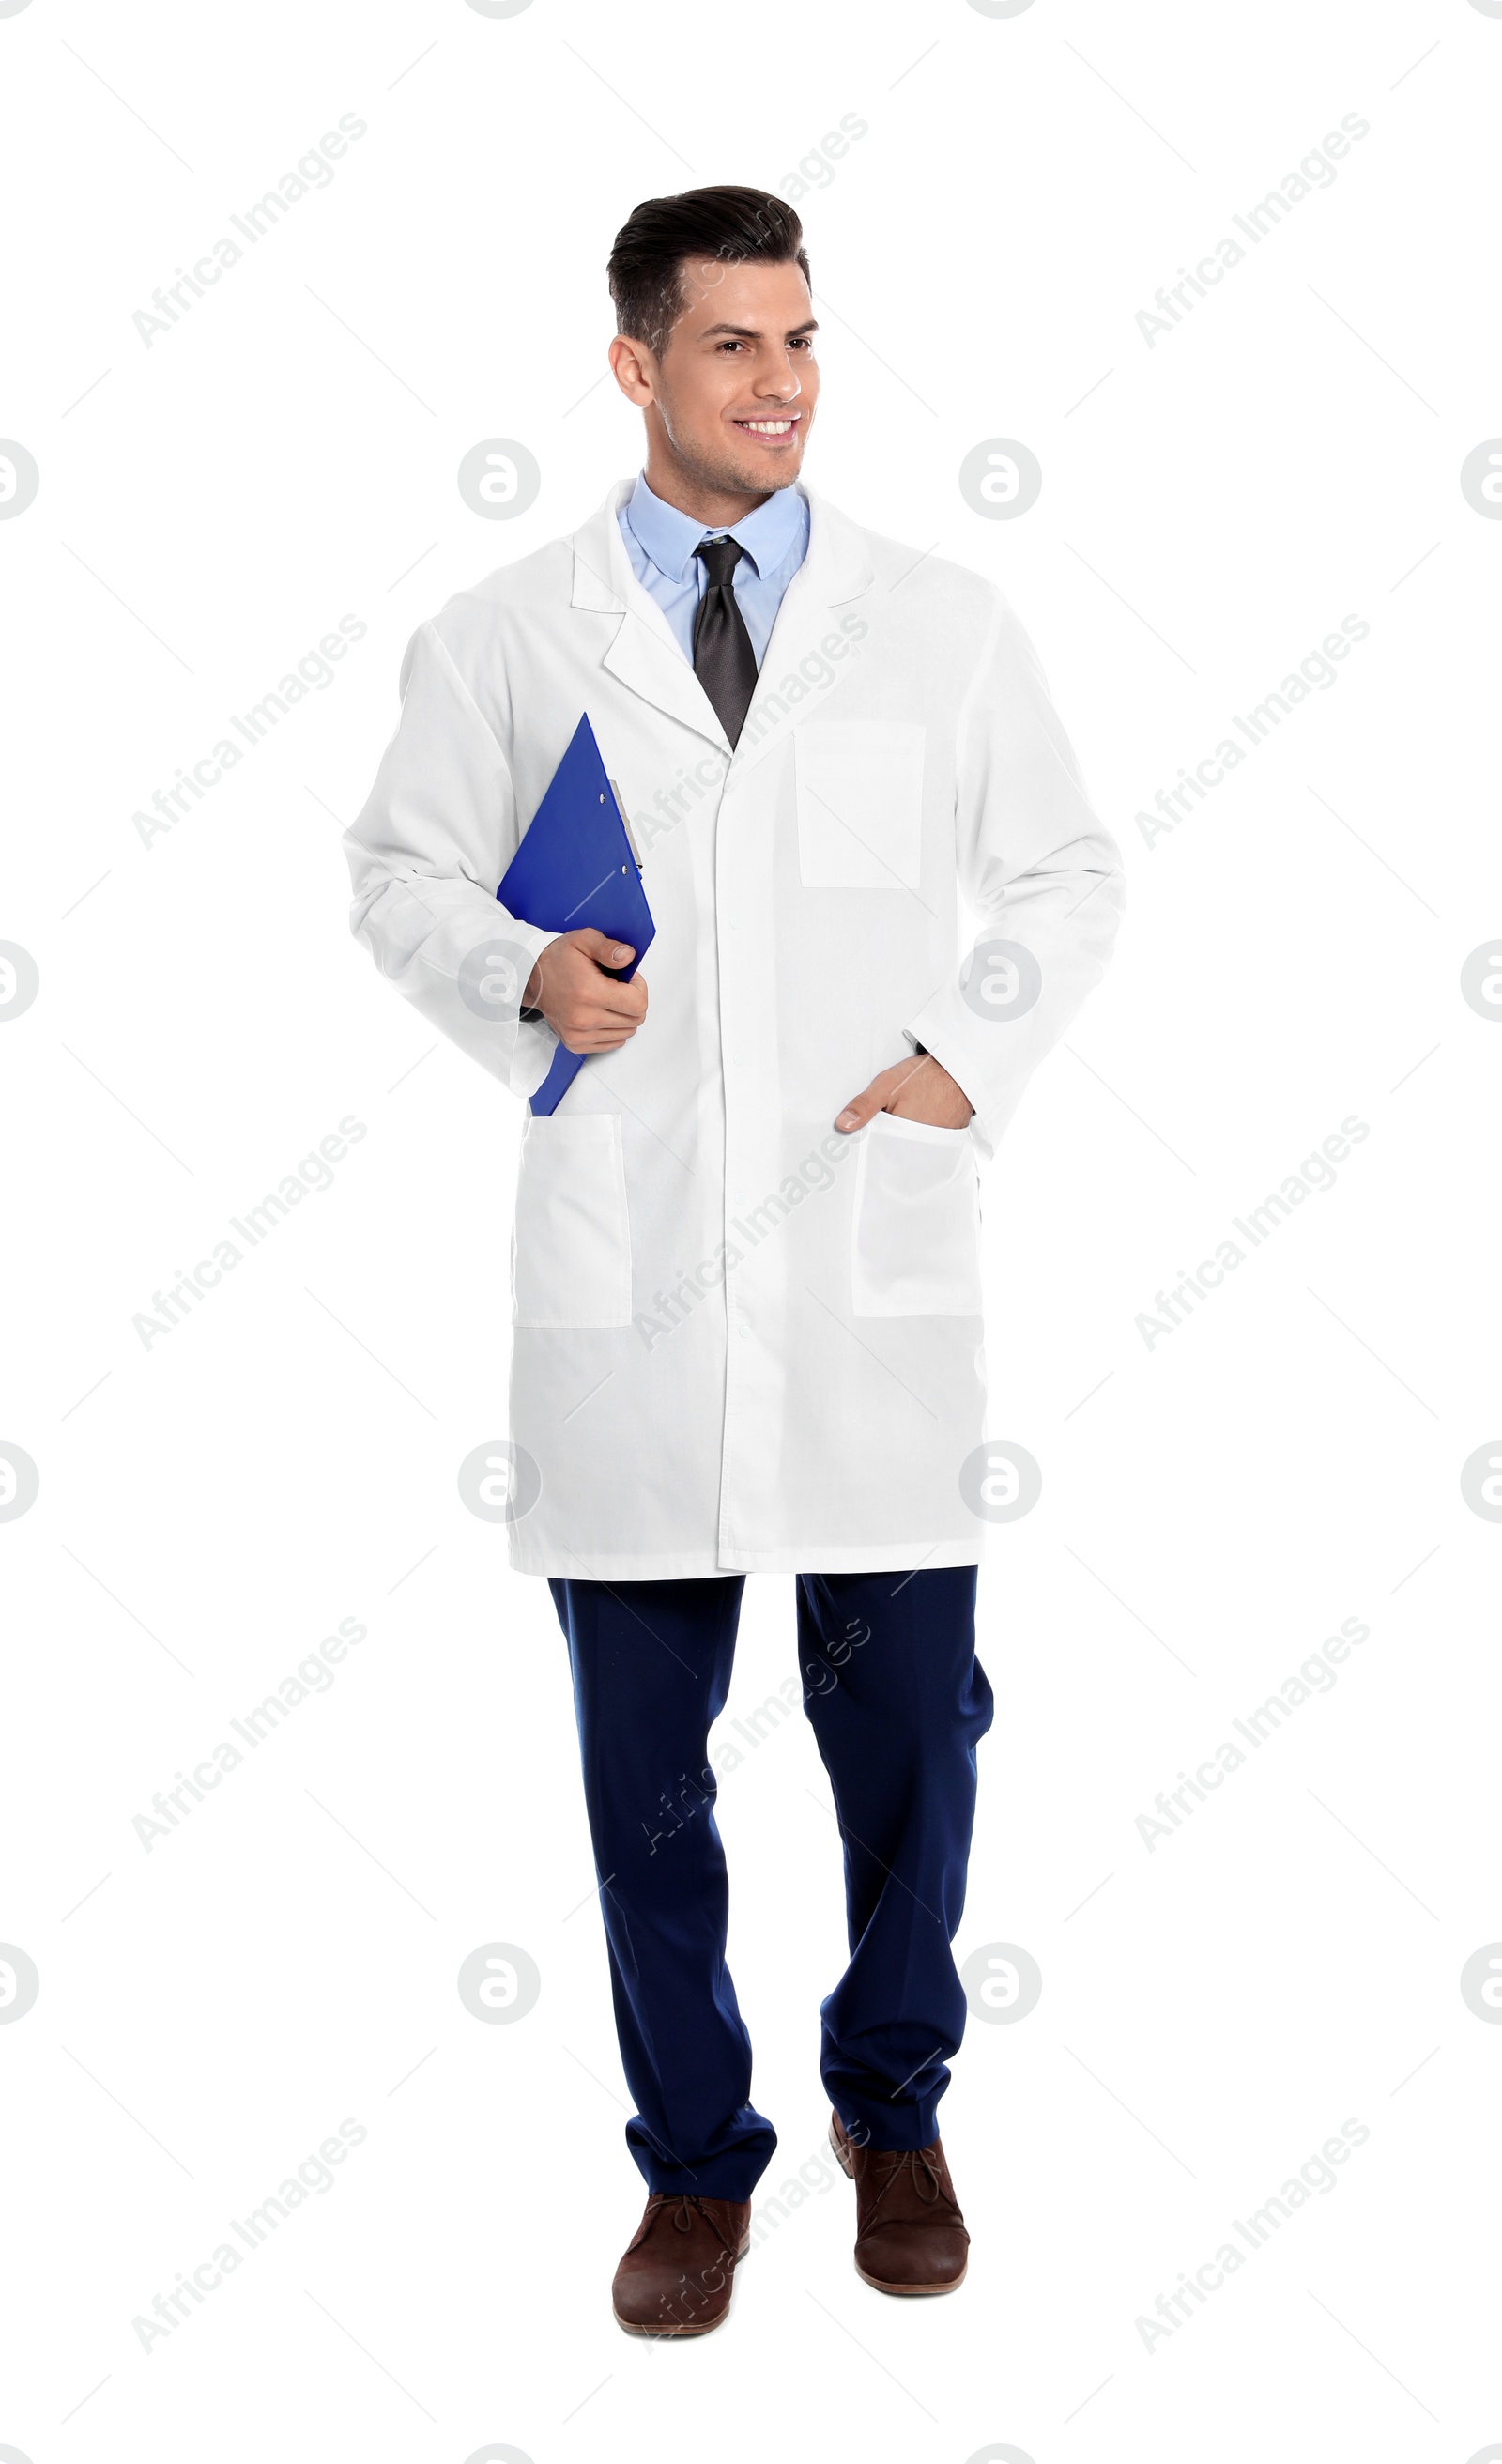 Photo of Full length portrait of medical doctor with clipboard isolated on white